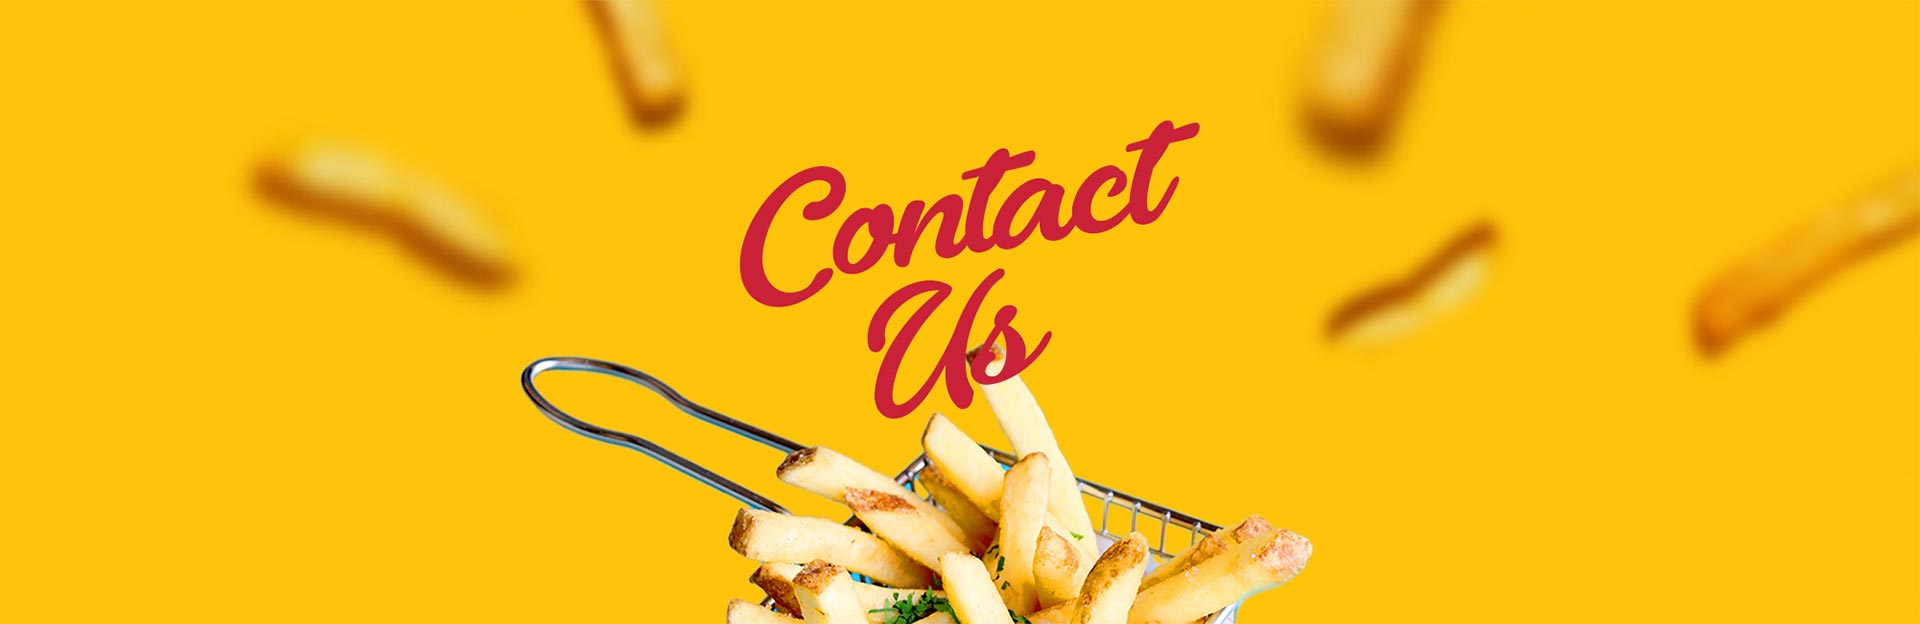 Sauce Banner-Contact Us